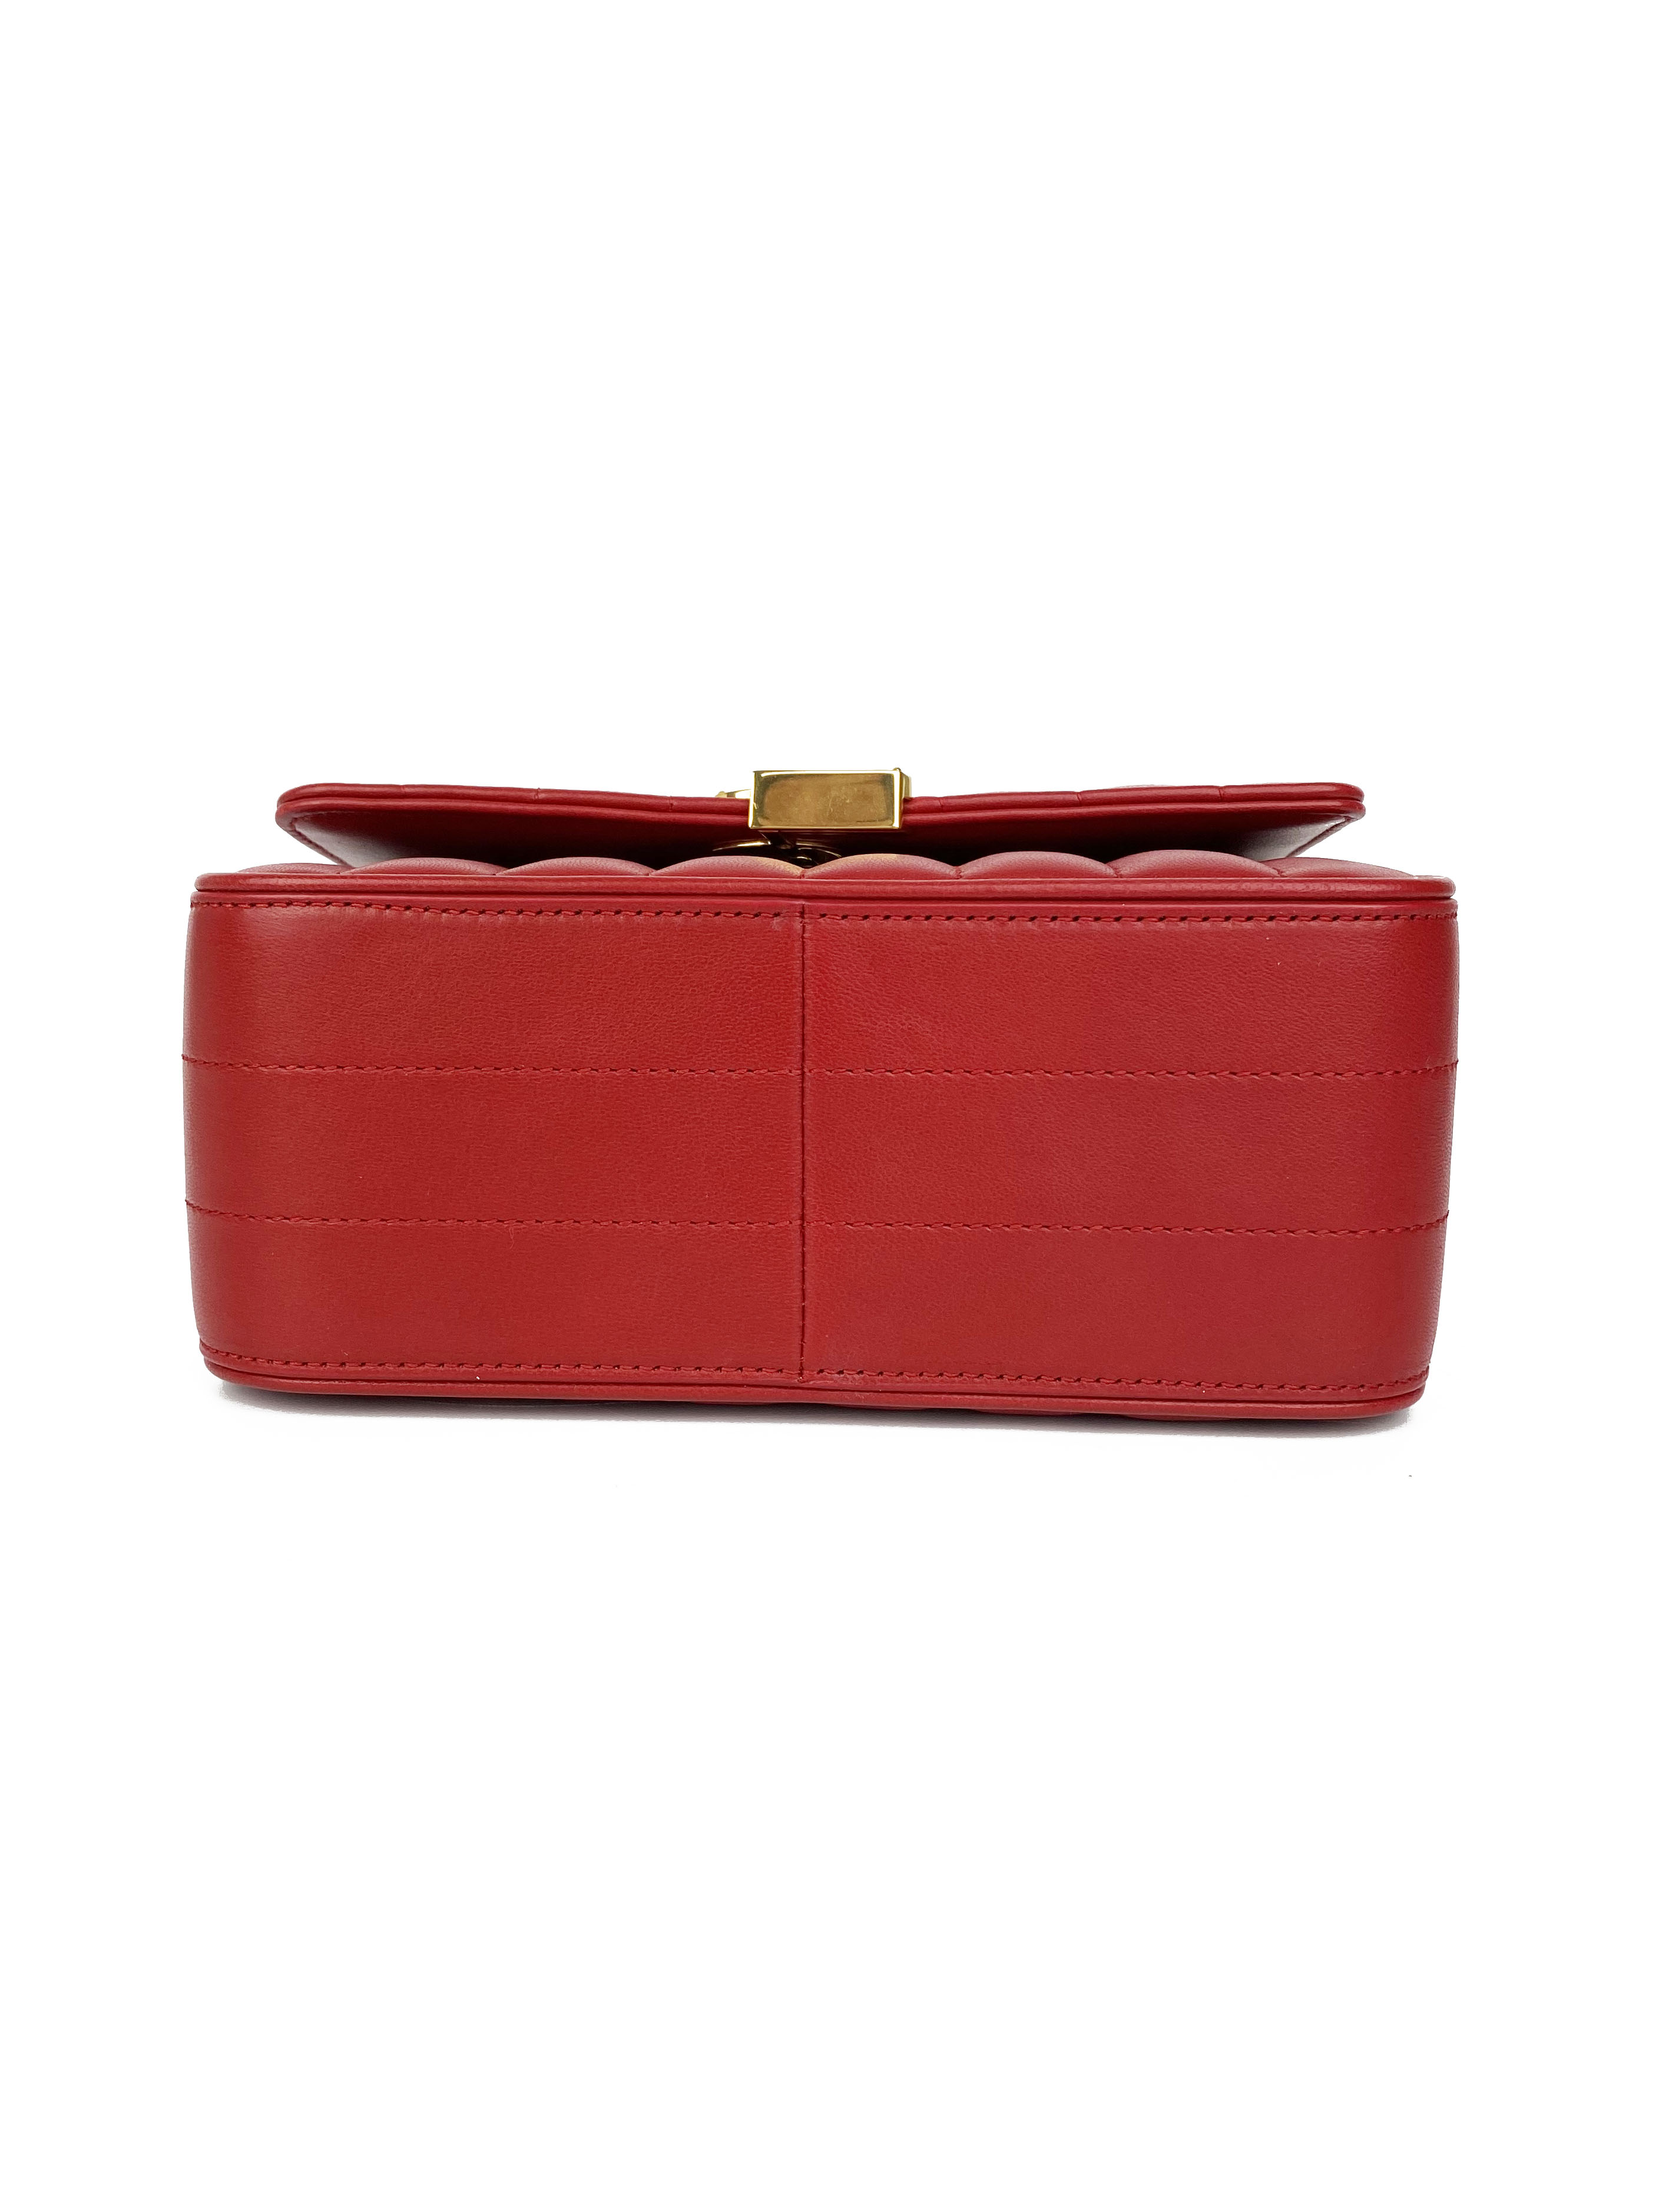 Saint Laurent Small Red Vicky Bag